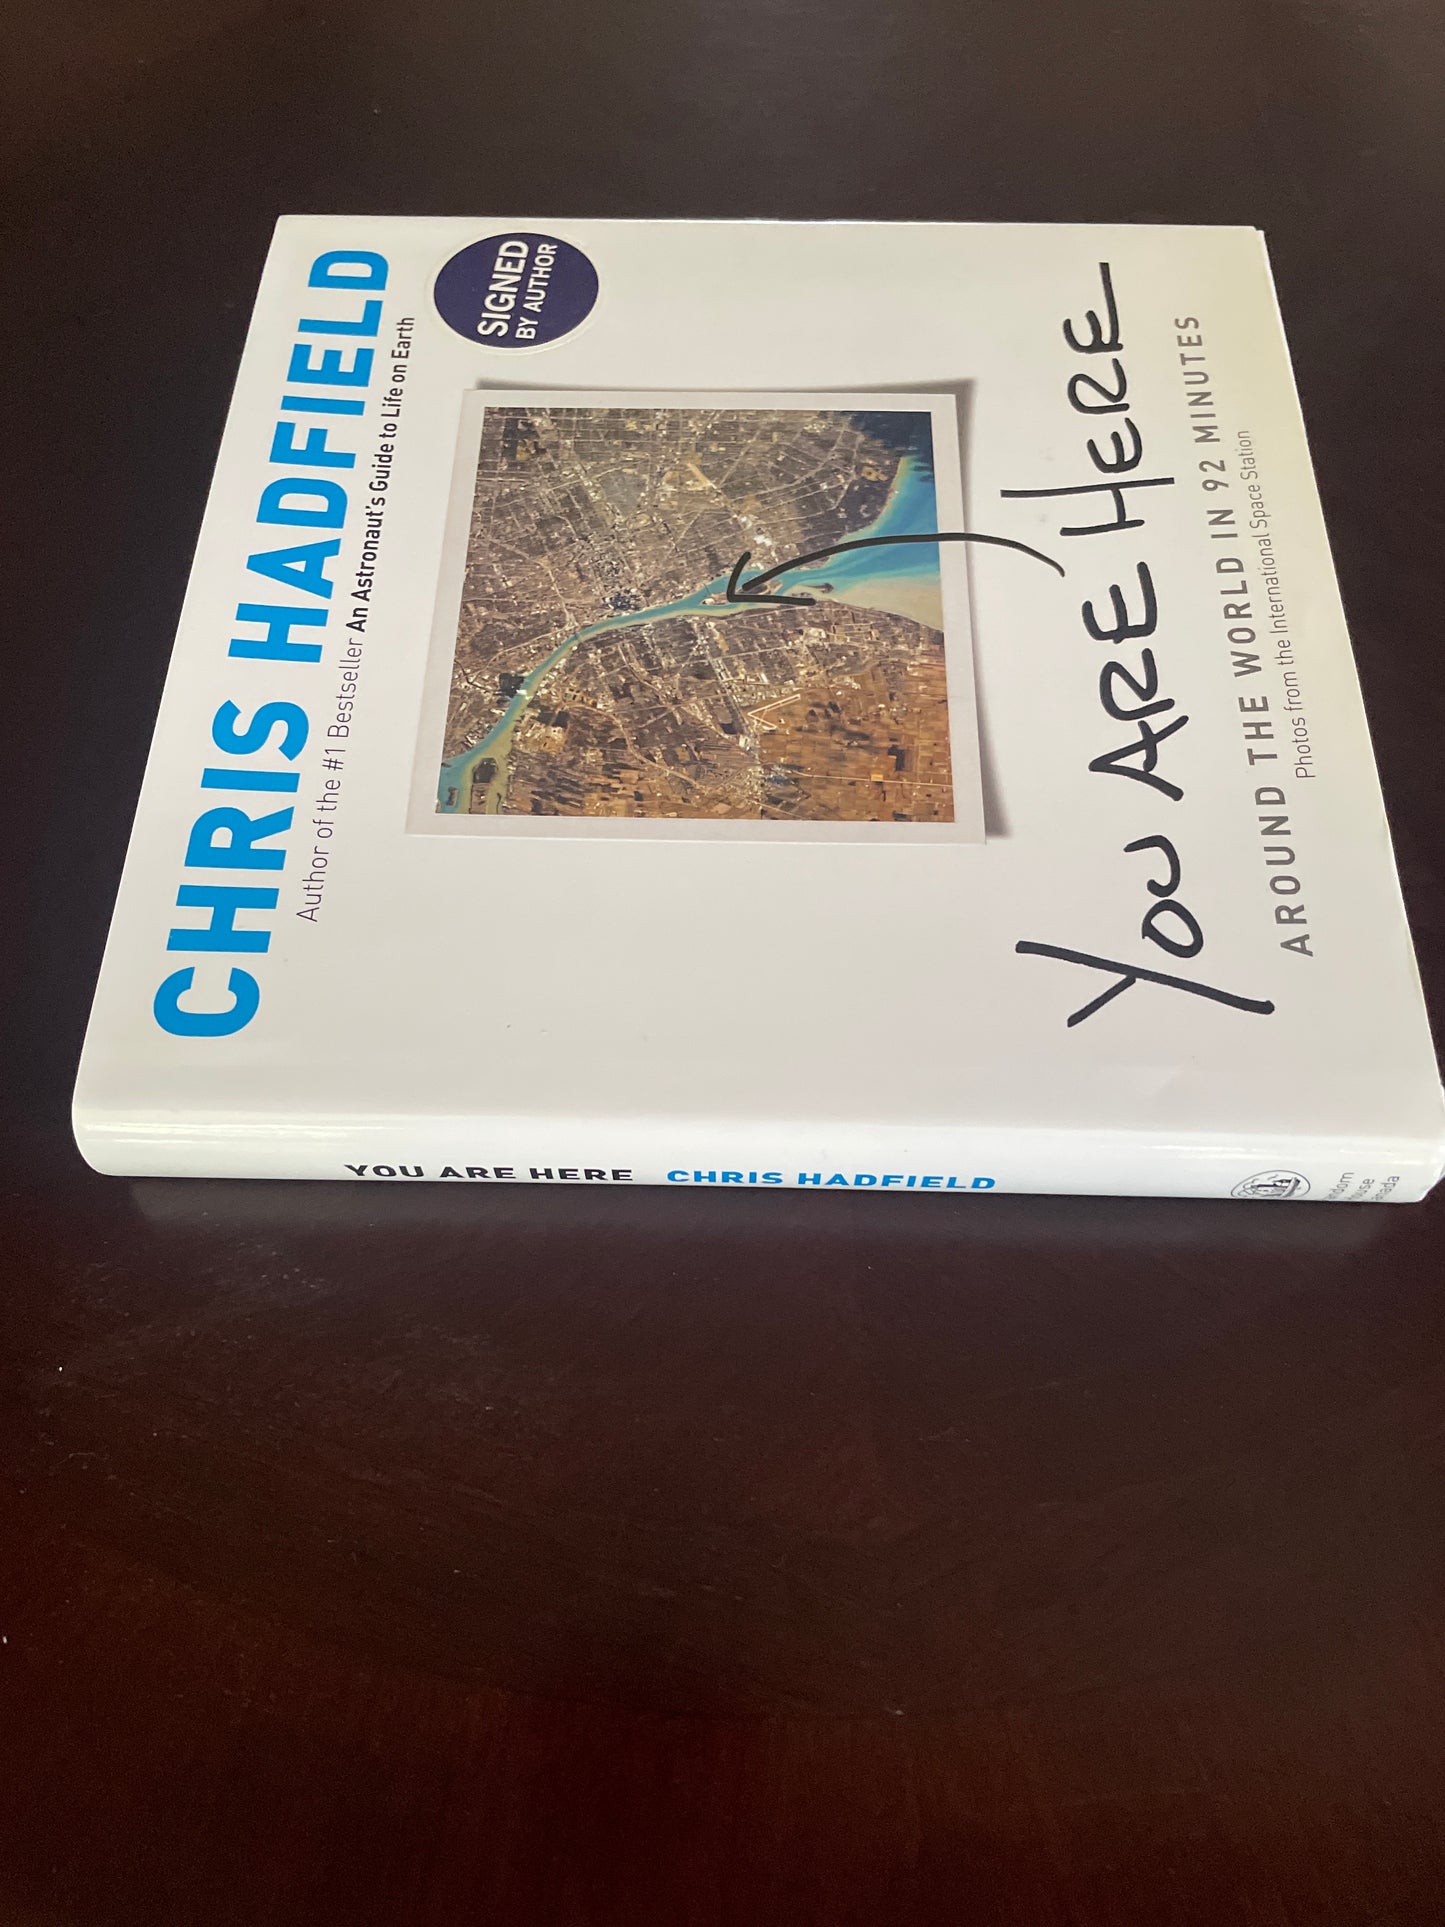 You Are Here: Around the World in 92 Minutes (Signed) - Hadfield, Chris